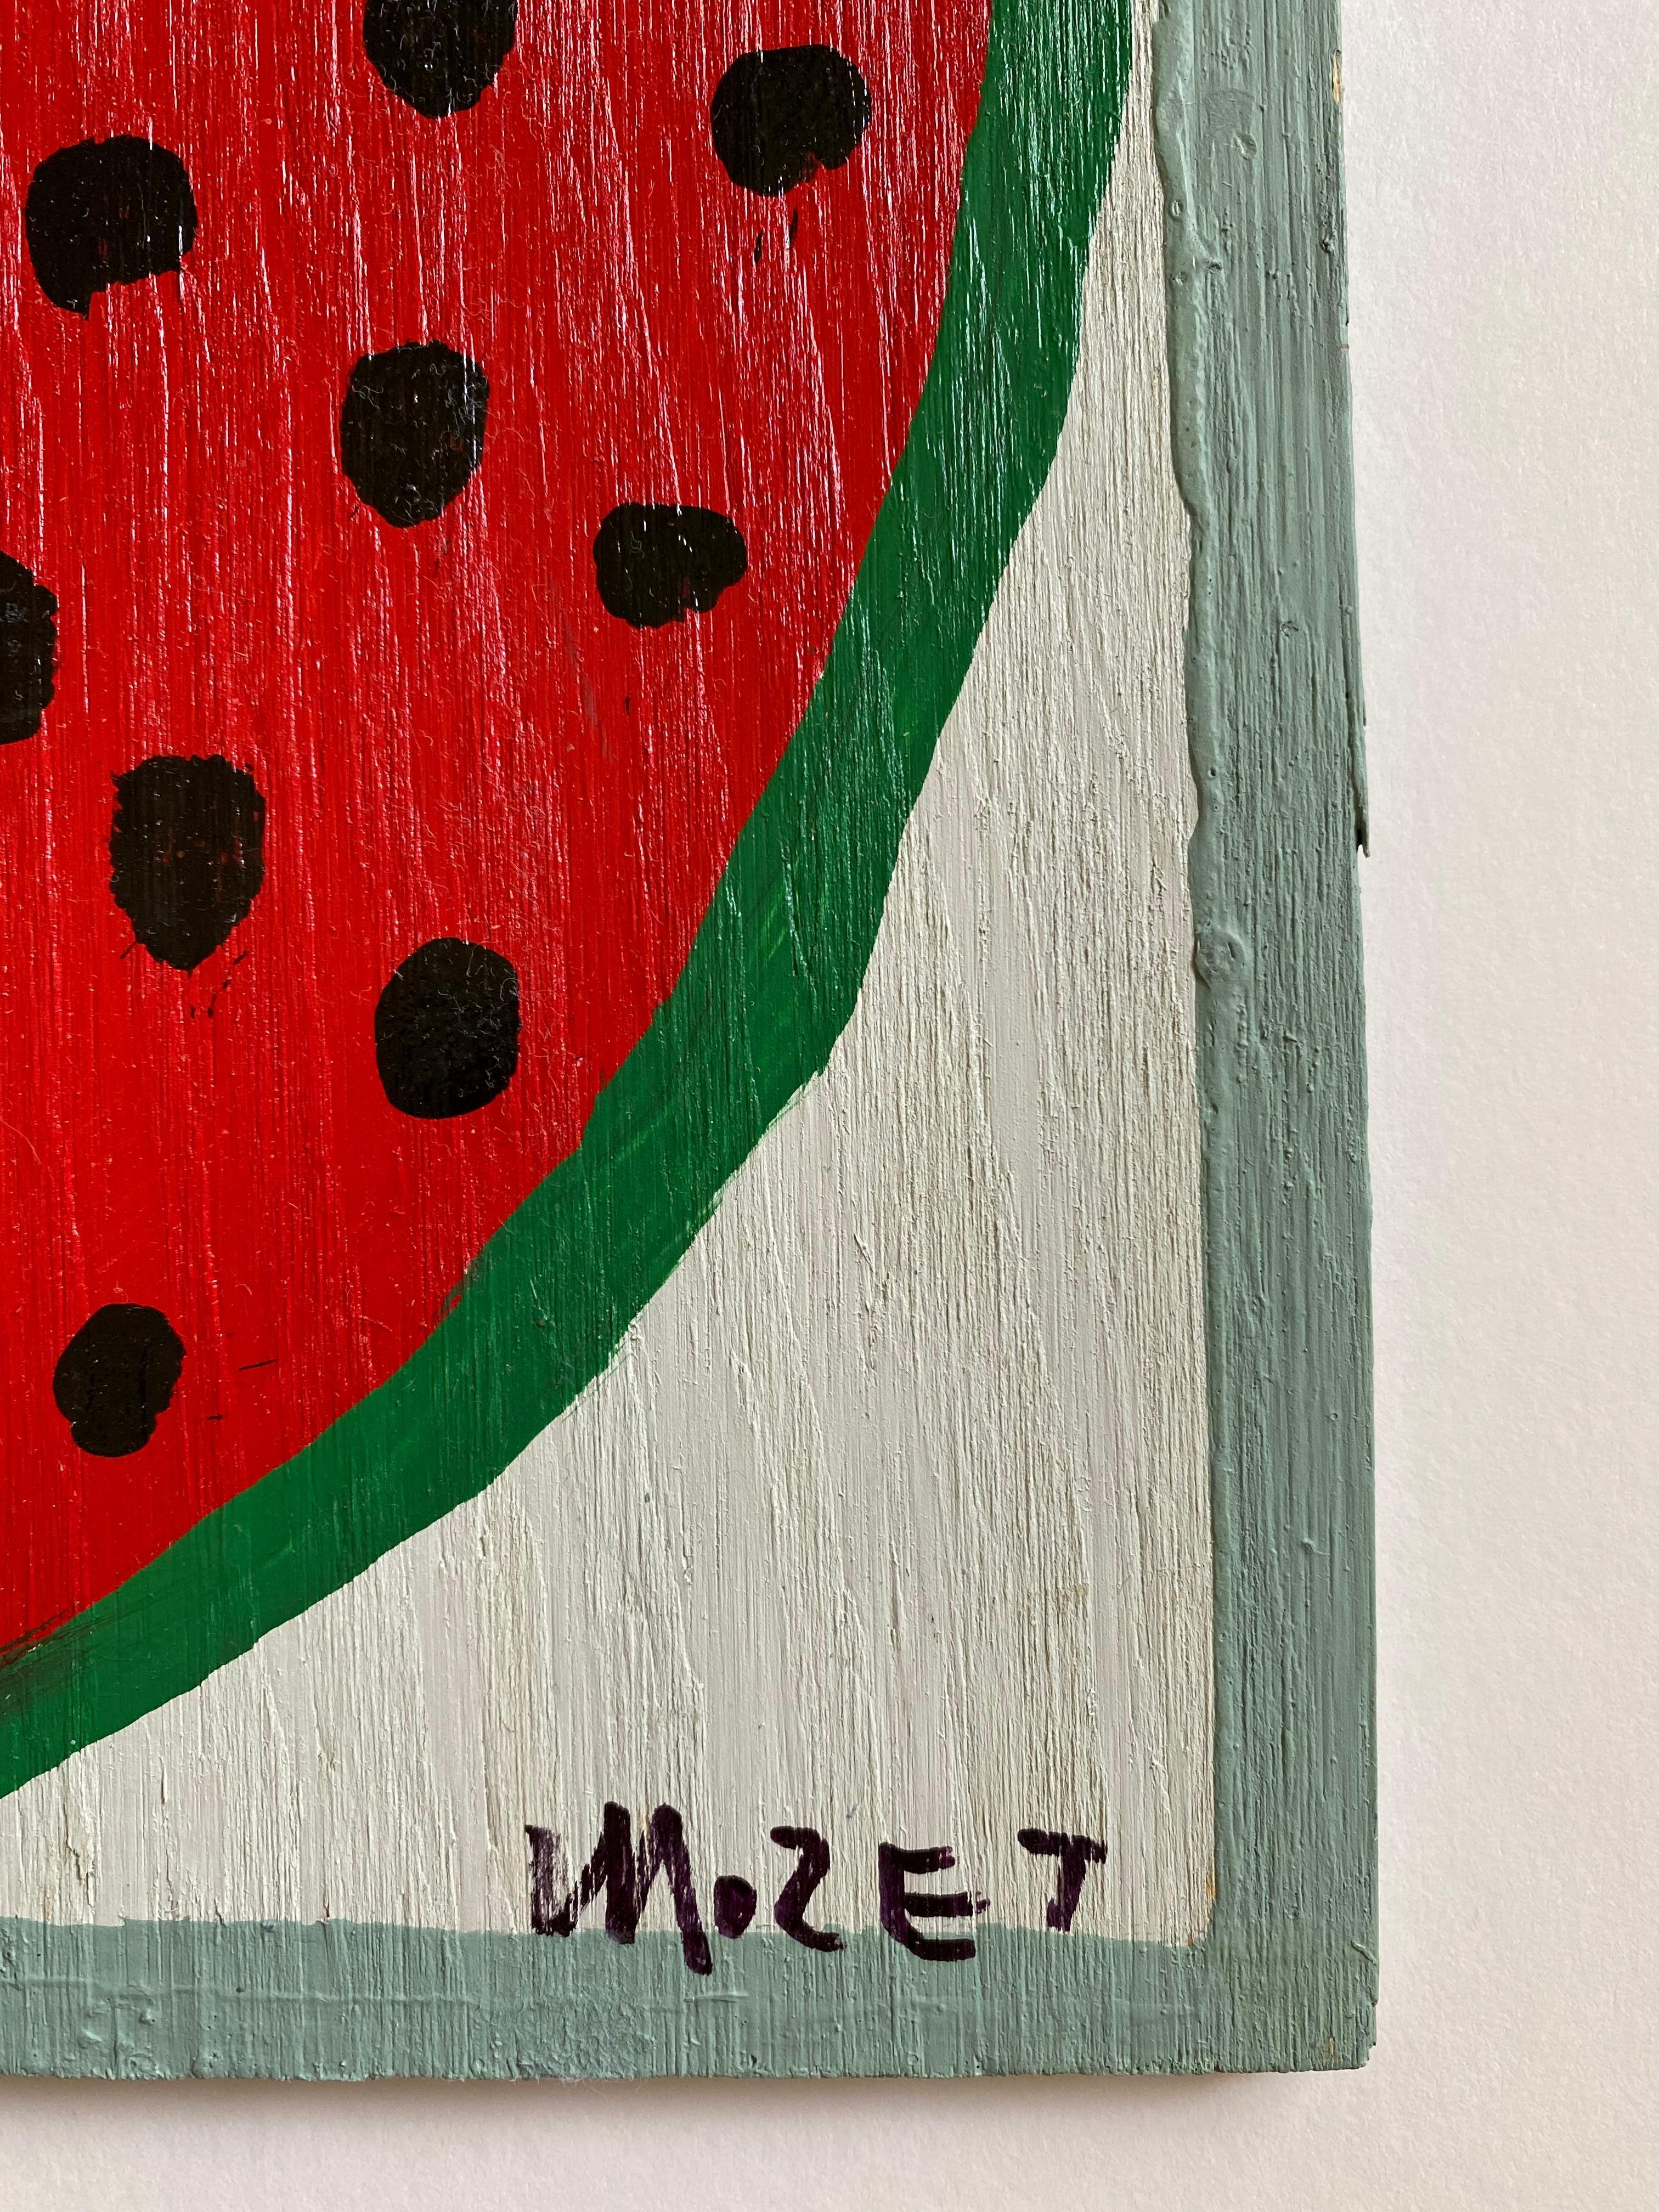 mose t watermelon painting